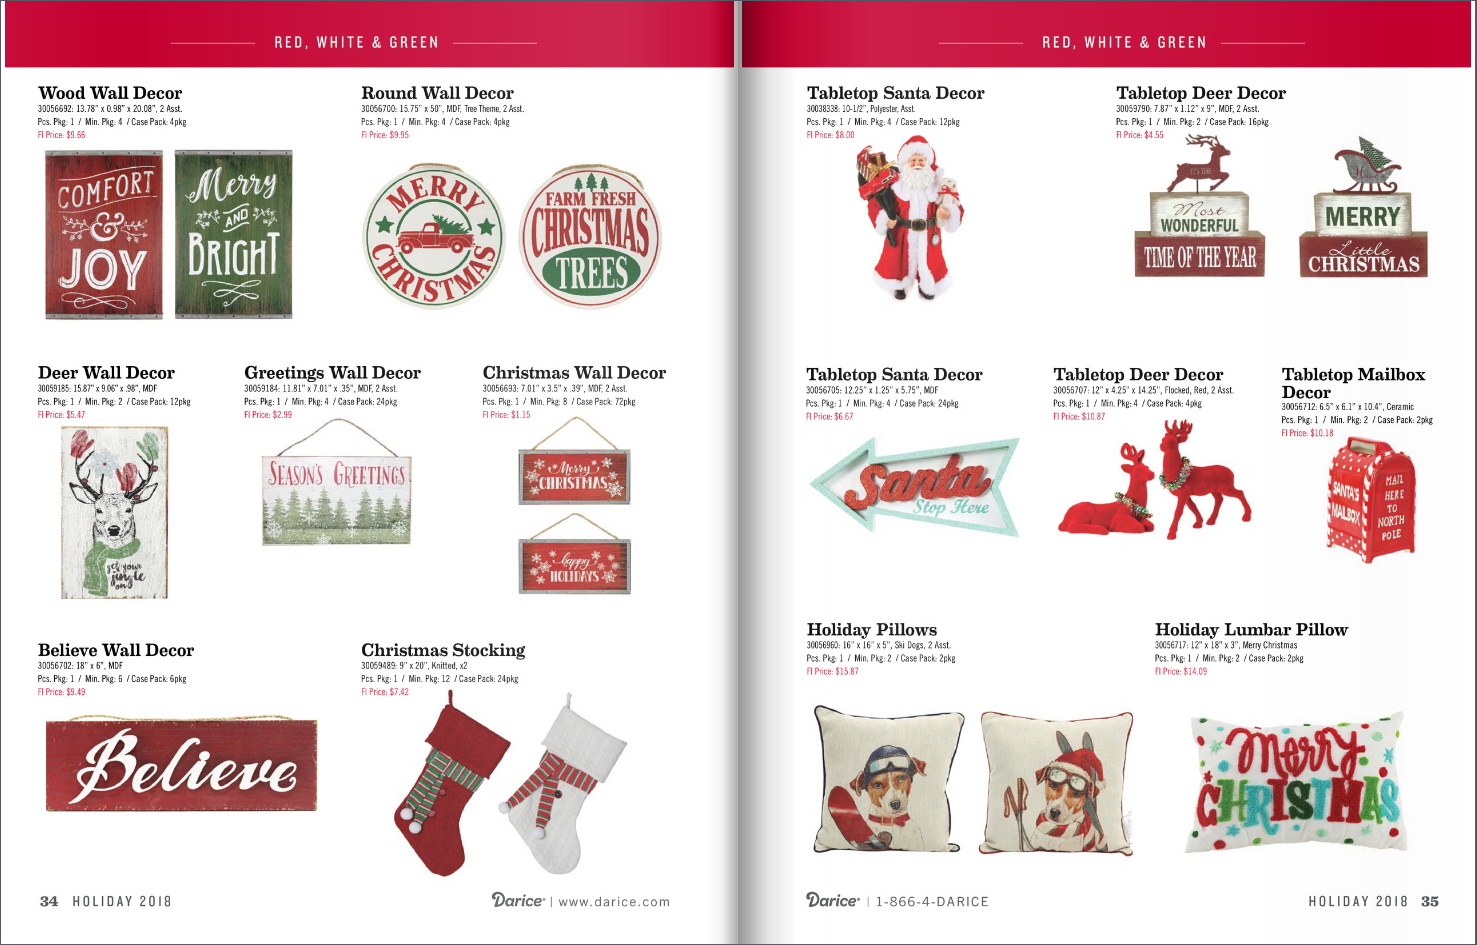 Christmas catalogs A list of real catalogs to get inspiration for